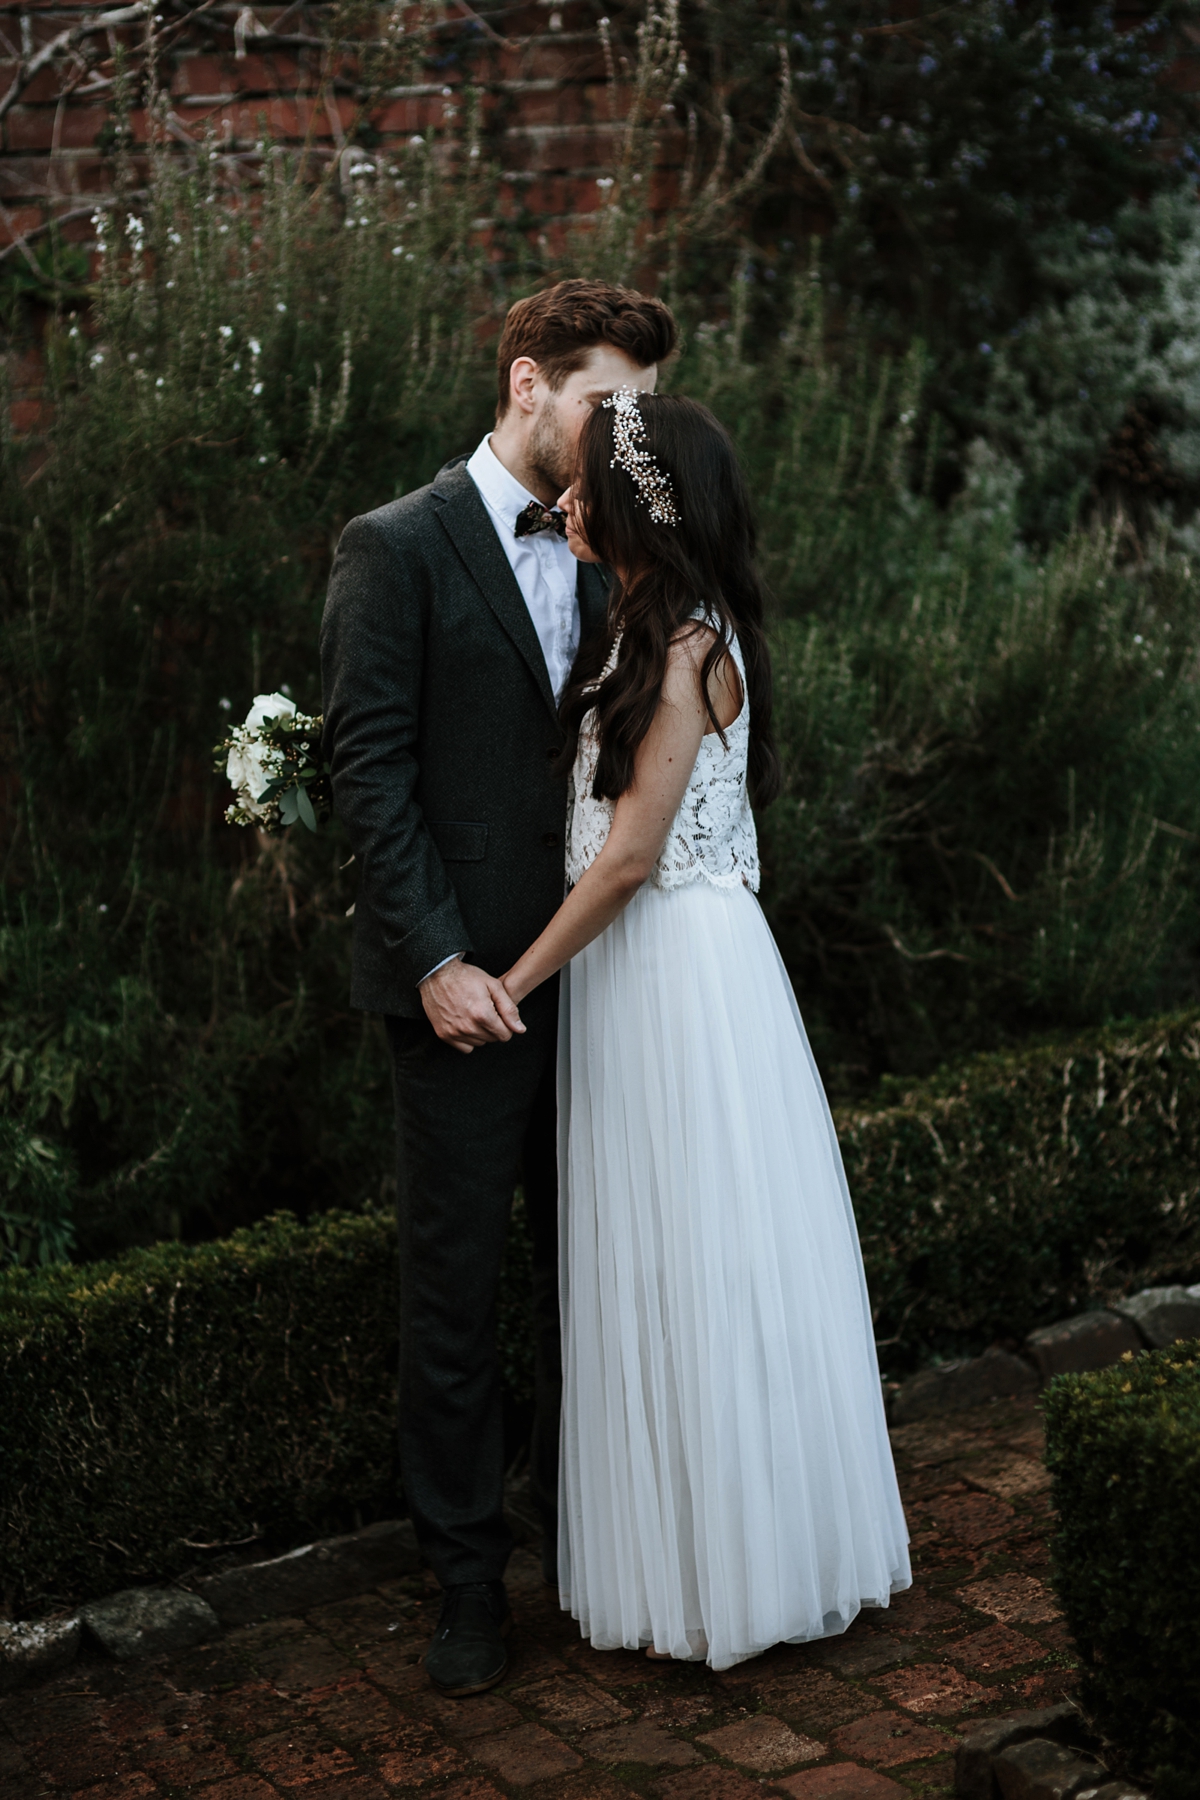 20 A BHLDN dress for a low key and intimate wedding